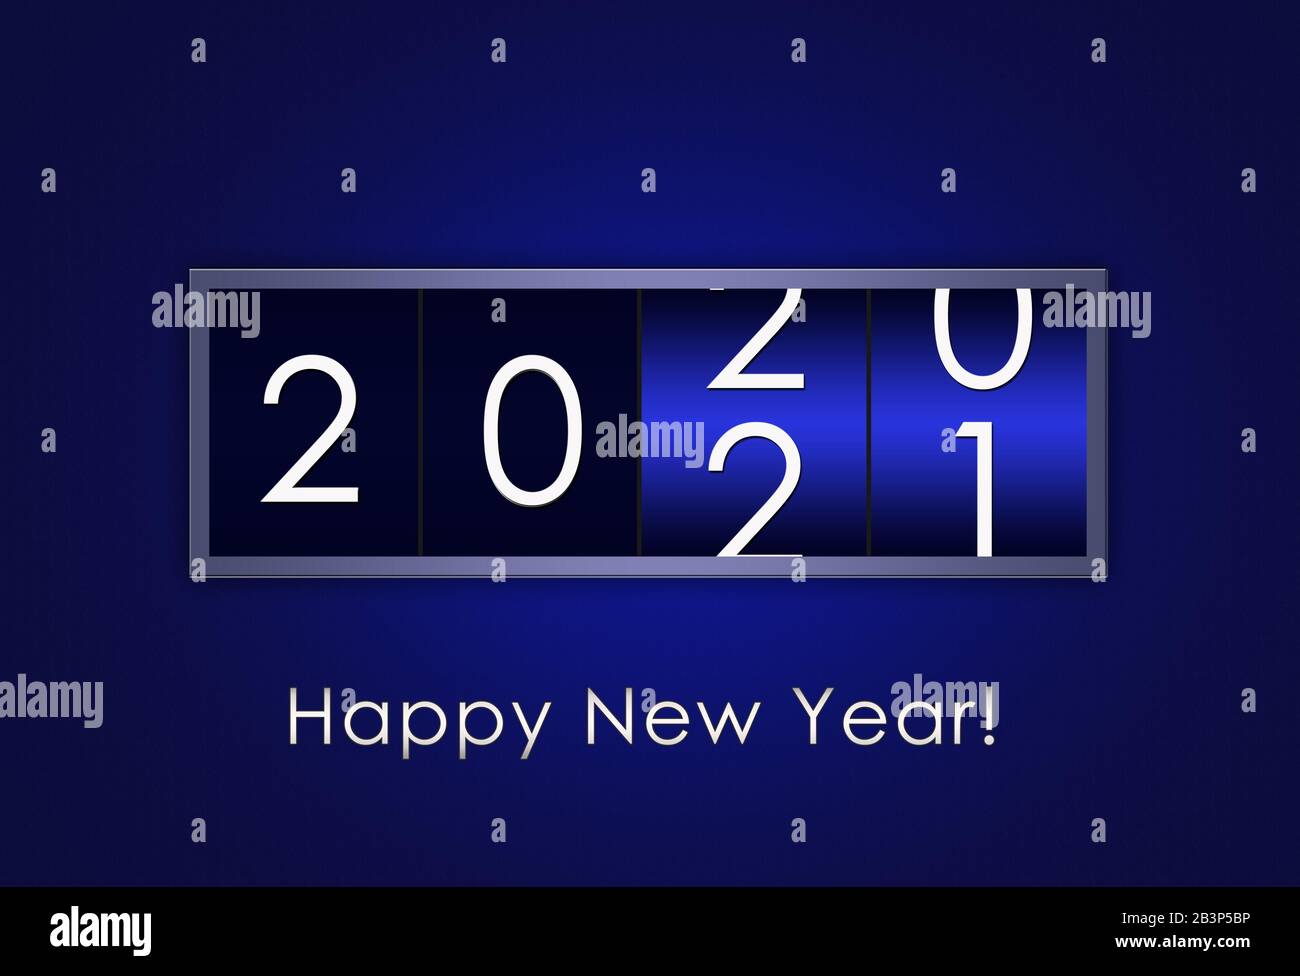 Countdown timer on a blue background with a change in the number of the year from 2020 to 2021.The color of the year 2020 - blue Stock Photo